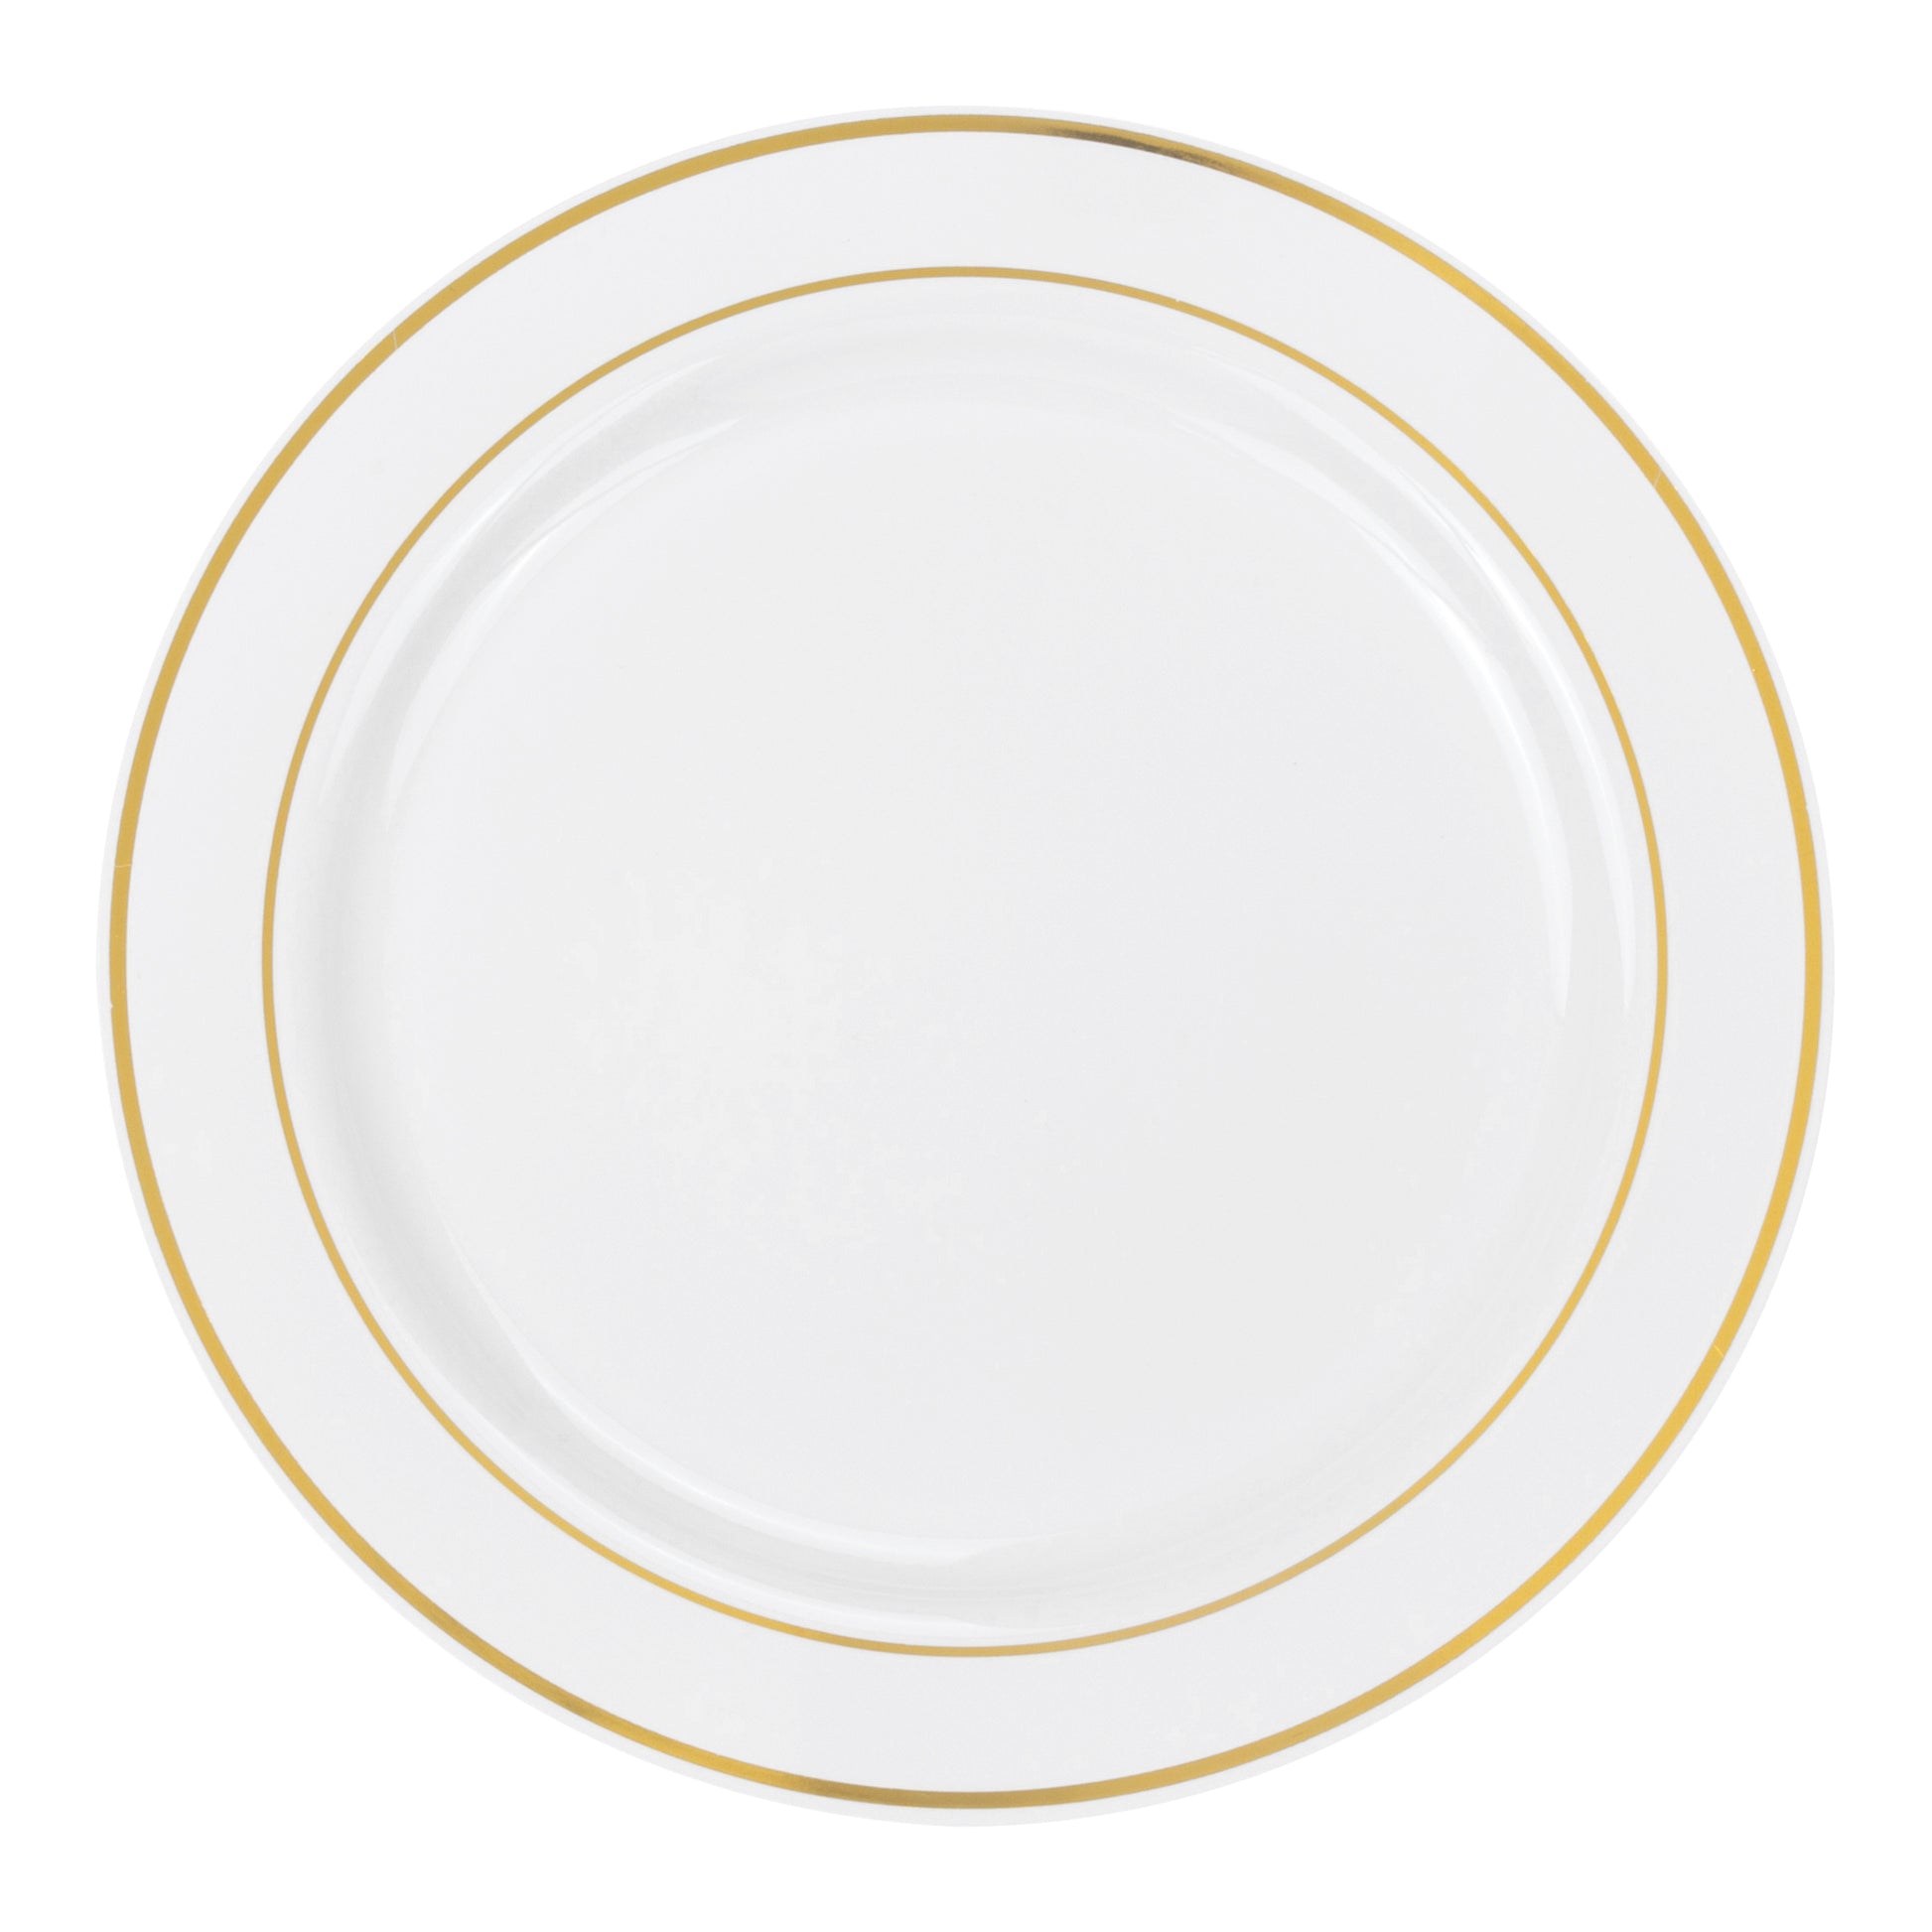 https://www.cvlinens.com/cdn/shop/products/Classic-Disposable-Plastic-Plates-40-Pieces-Combo-Pack-White-Gold-Trimmed.jpg?v=1614974016&width=1946